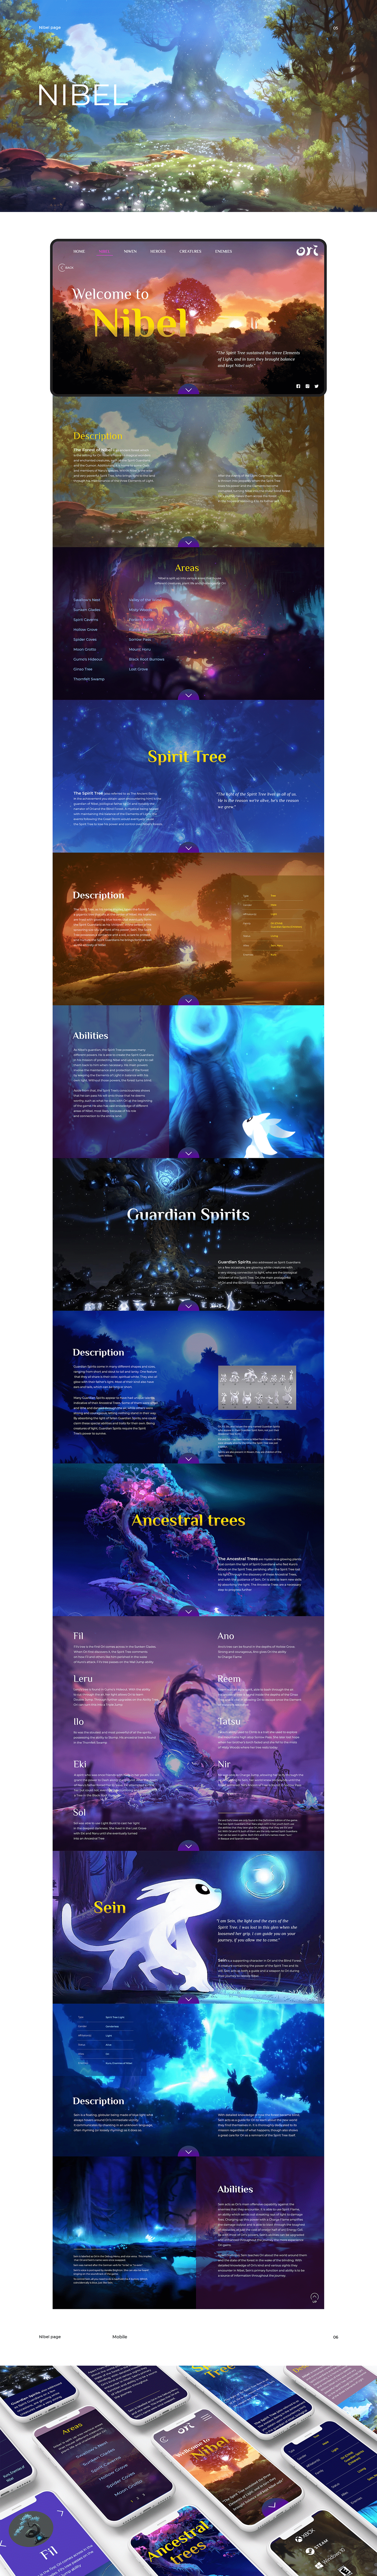 blind forest concept game game design  mobile moon studio Ori ux/ui Web Design  Will of the Wisps